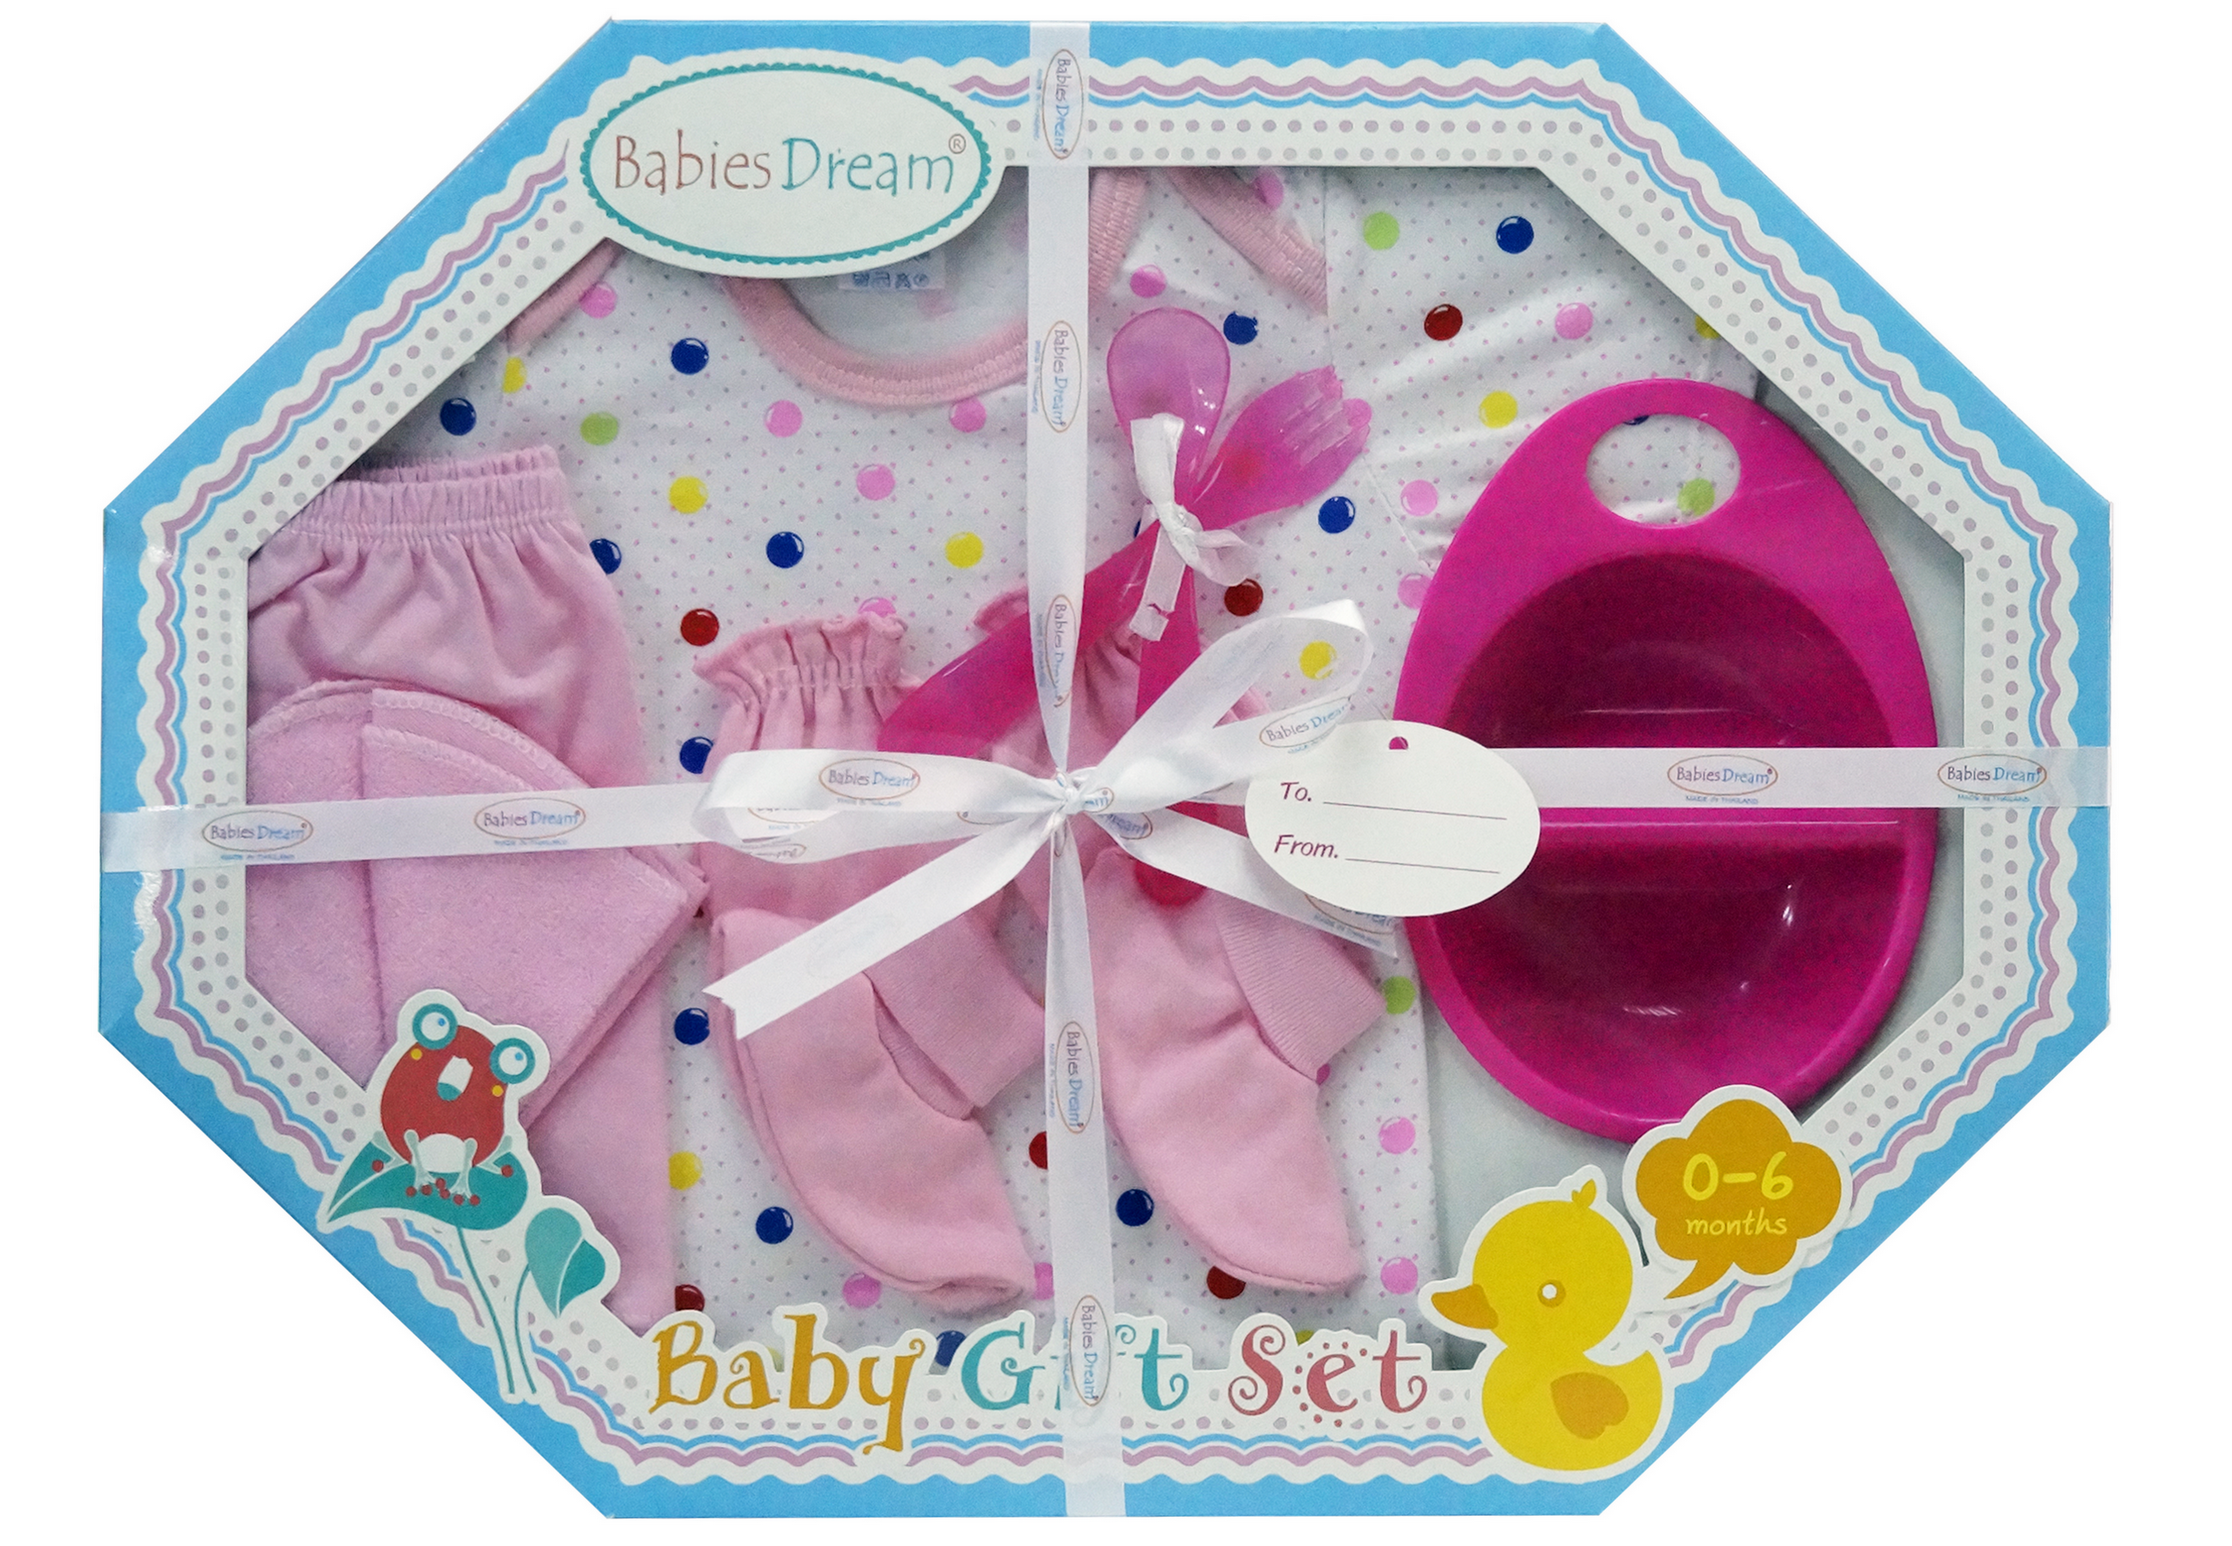 8 Pieces baby gift set